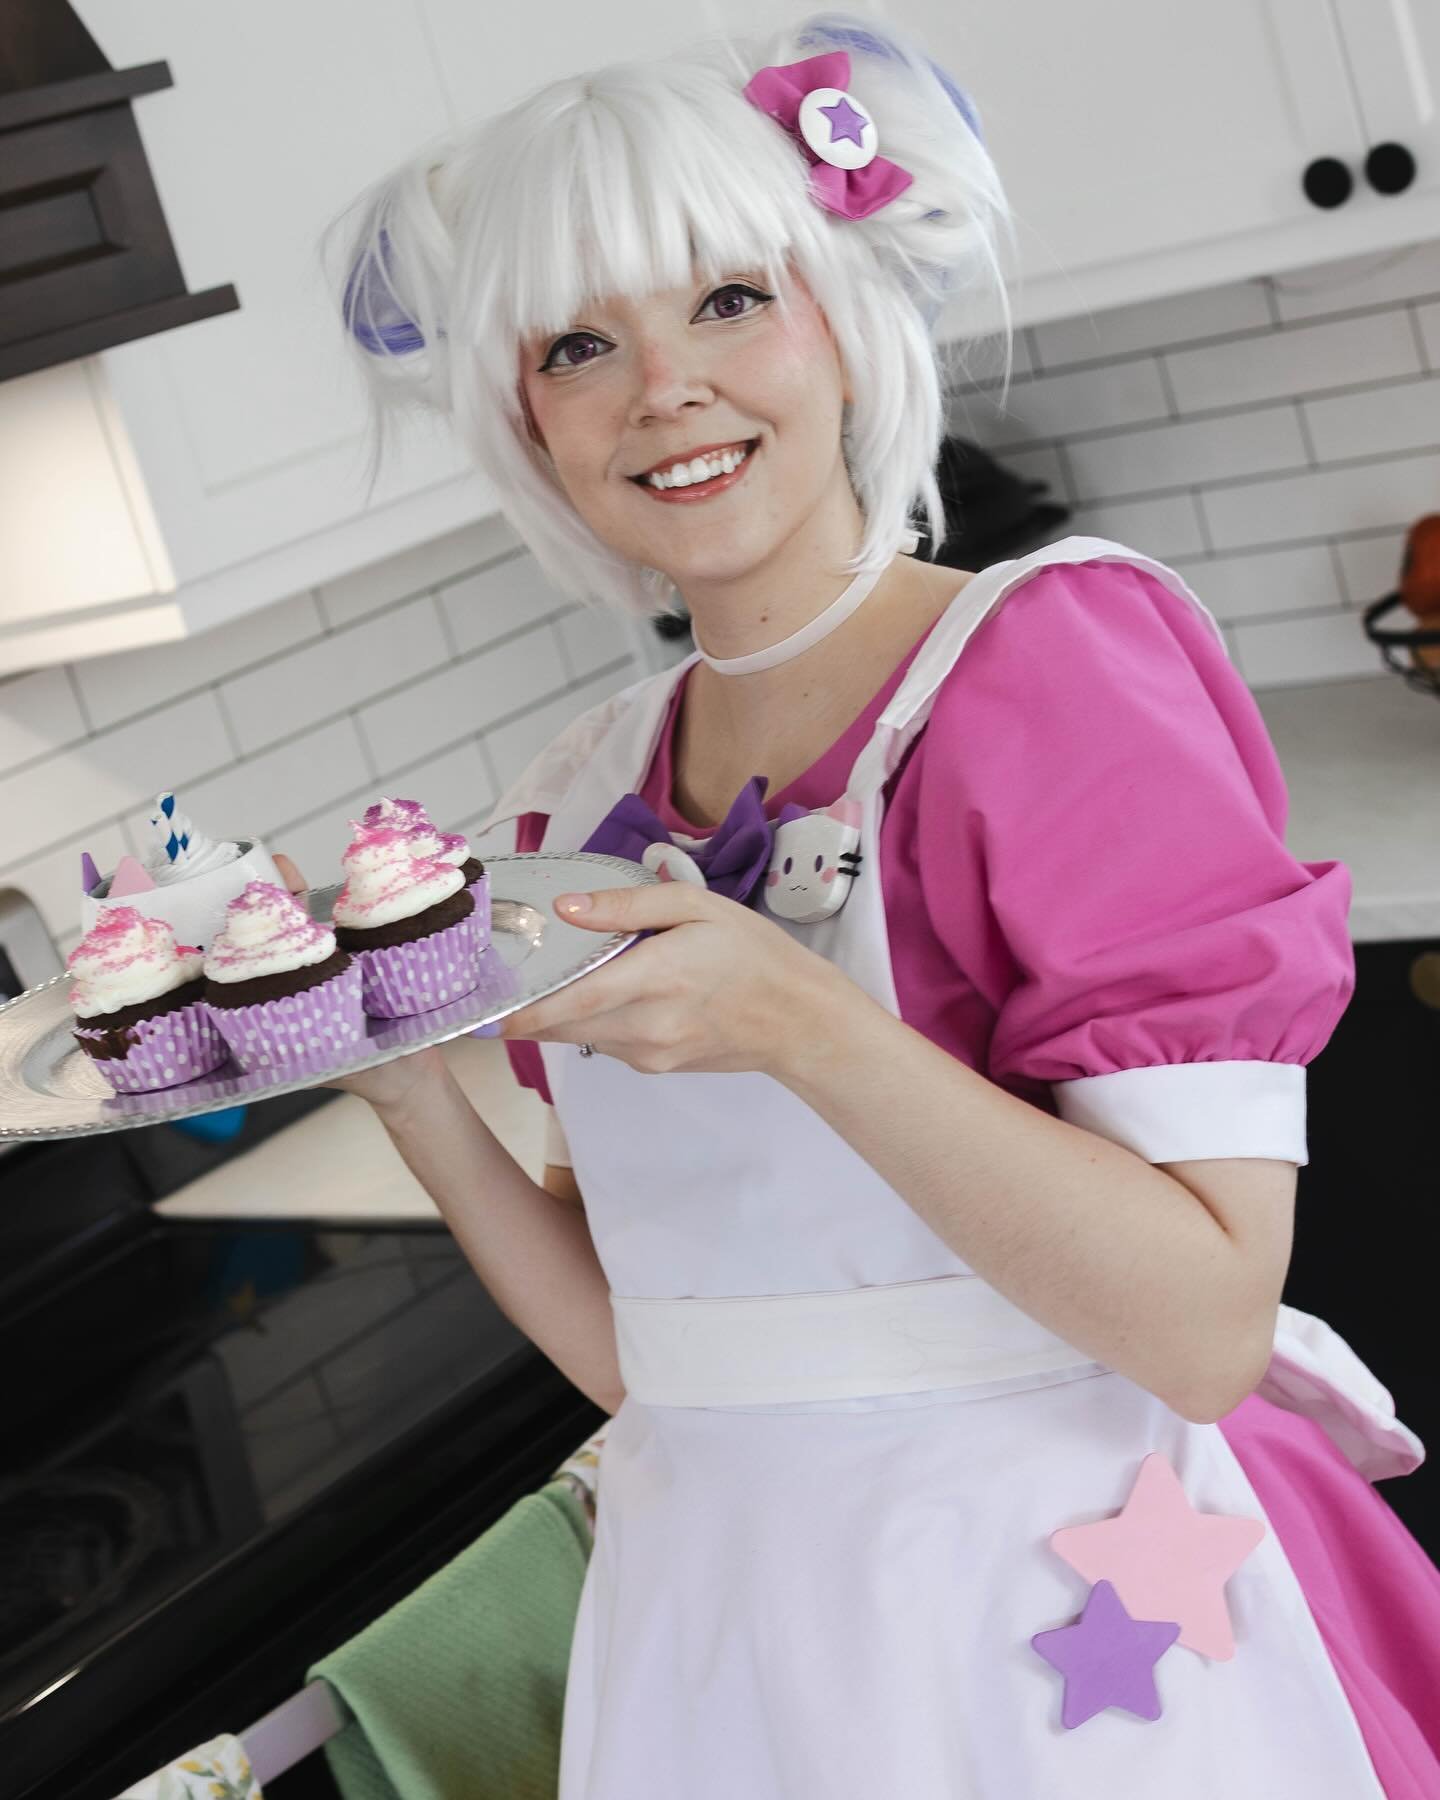 I made TOO many cupcakes 🥲
CandiCat OC by @devicat.art ✨
Costume made by me
Accessories + cup modelled and 3D printed by me
Photo by @kommisar_chiptune 
Lenses @uniqso 
Wig @ardawigs 
.
.
.
#devicatdtiys9 #candicat #devicat #occosplay #AnimeMaidCosp